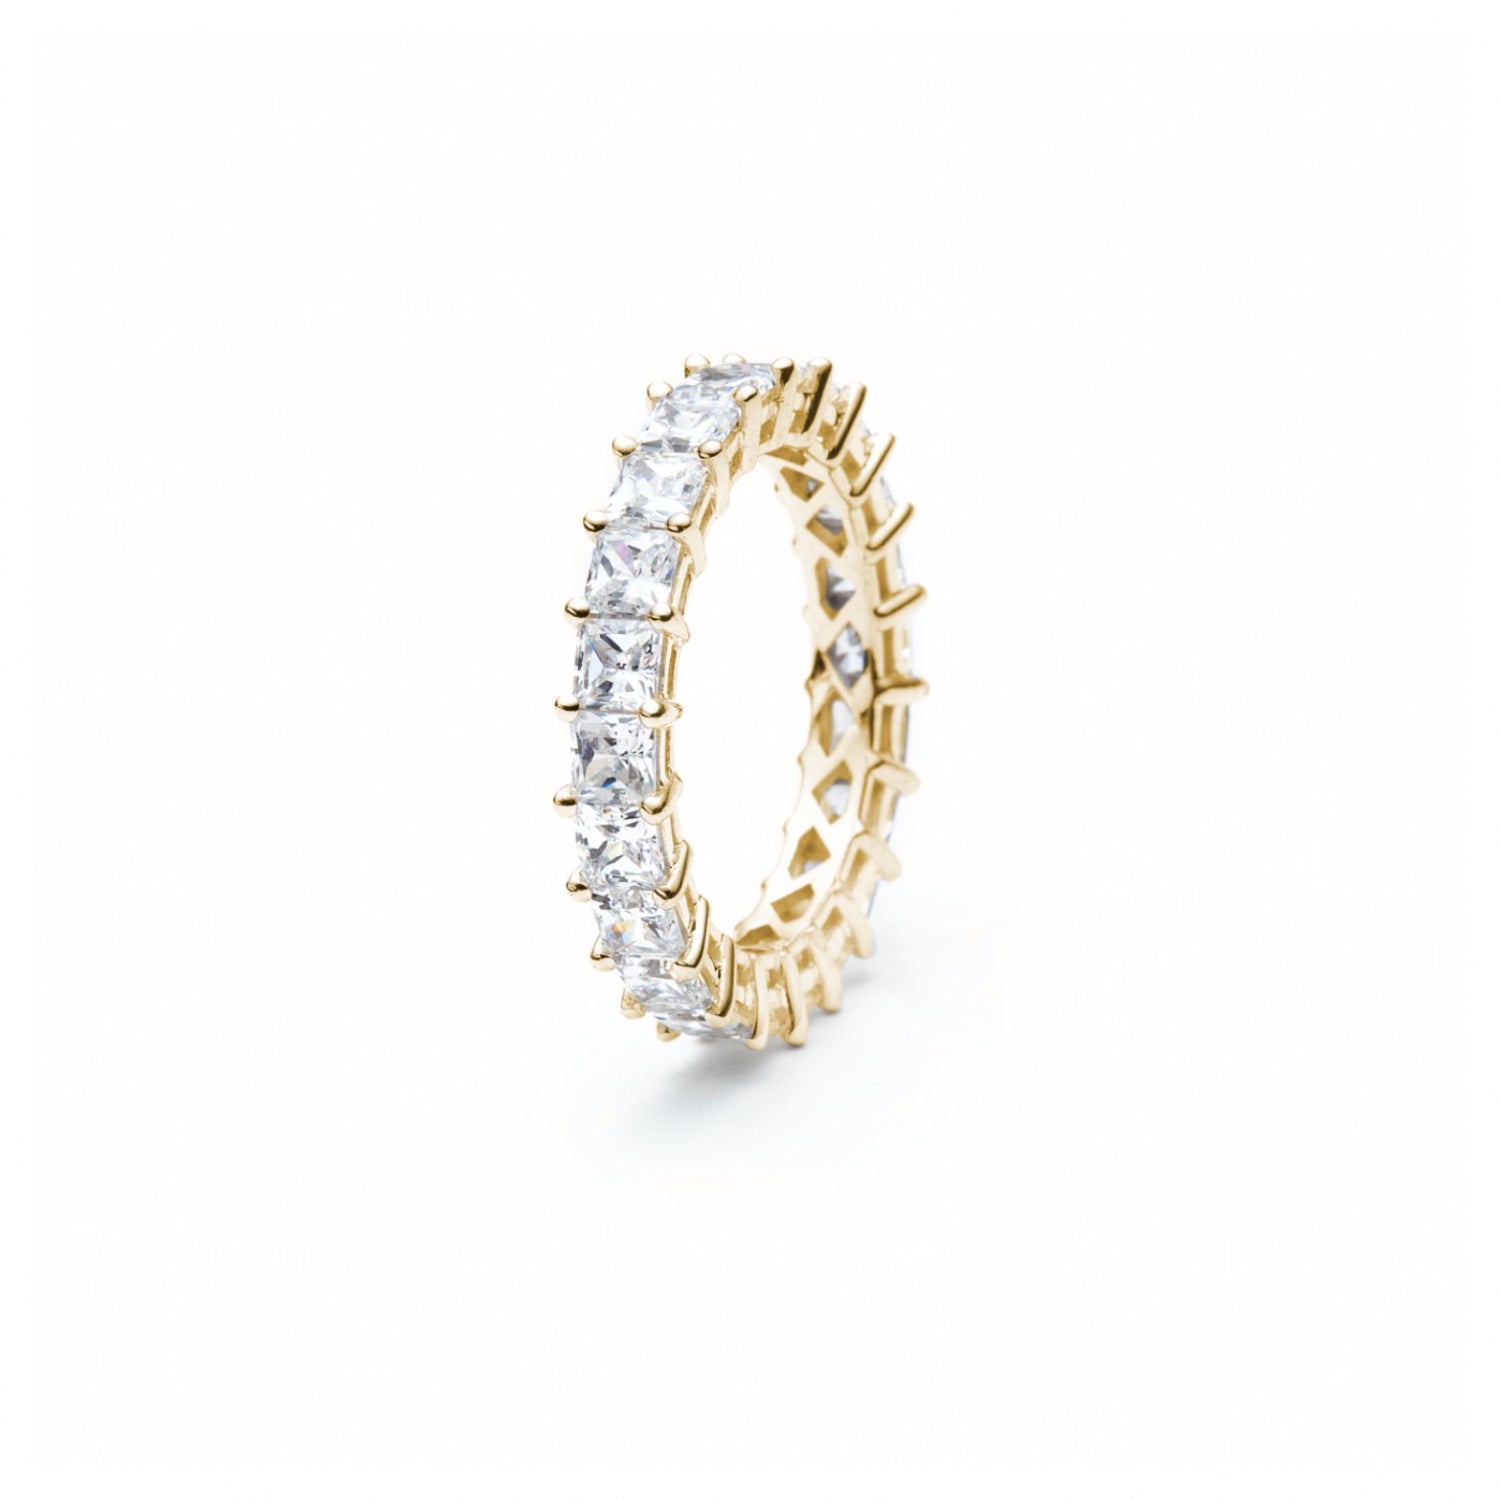 Signature Princess Cut Diamond Shared Prong Eternity Ring in Yellow Gold Side View